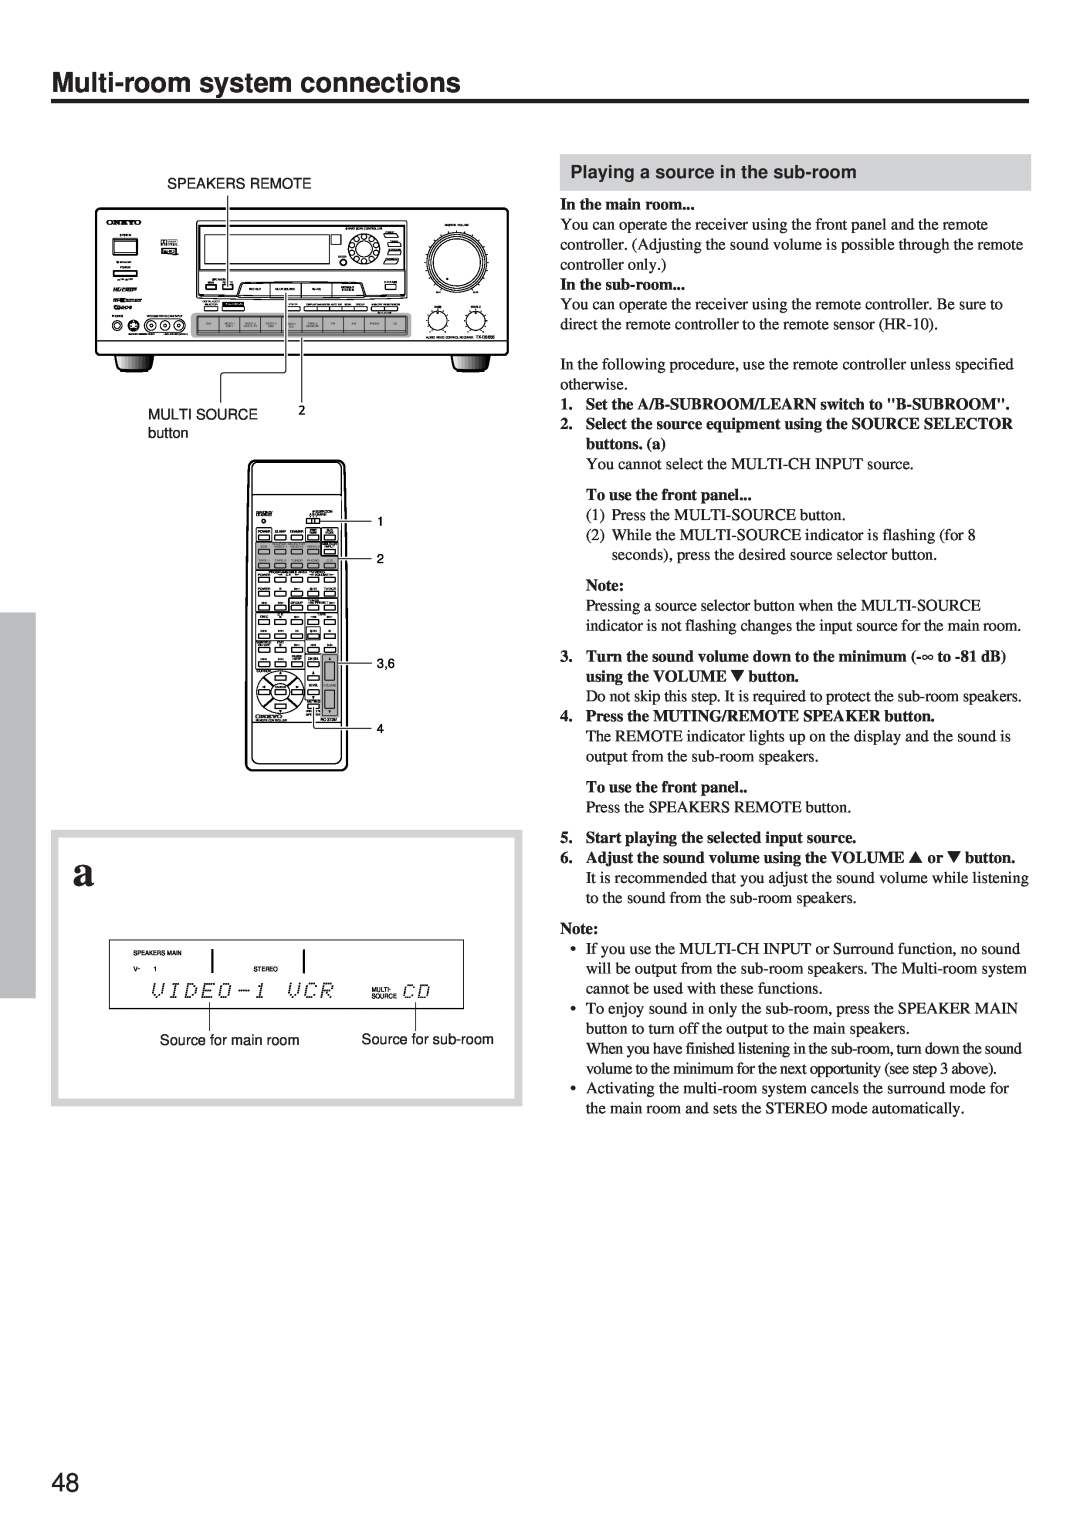 Onkyo TX-DS656 instruction manual Multi-roomsystem connections, Playing a source in the sub-room 